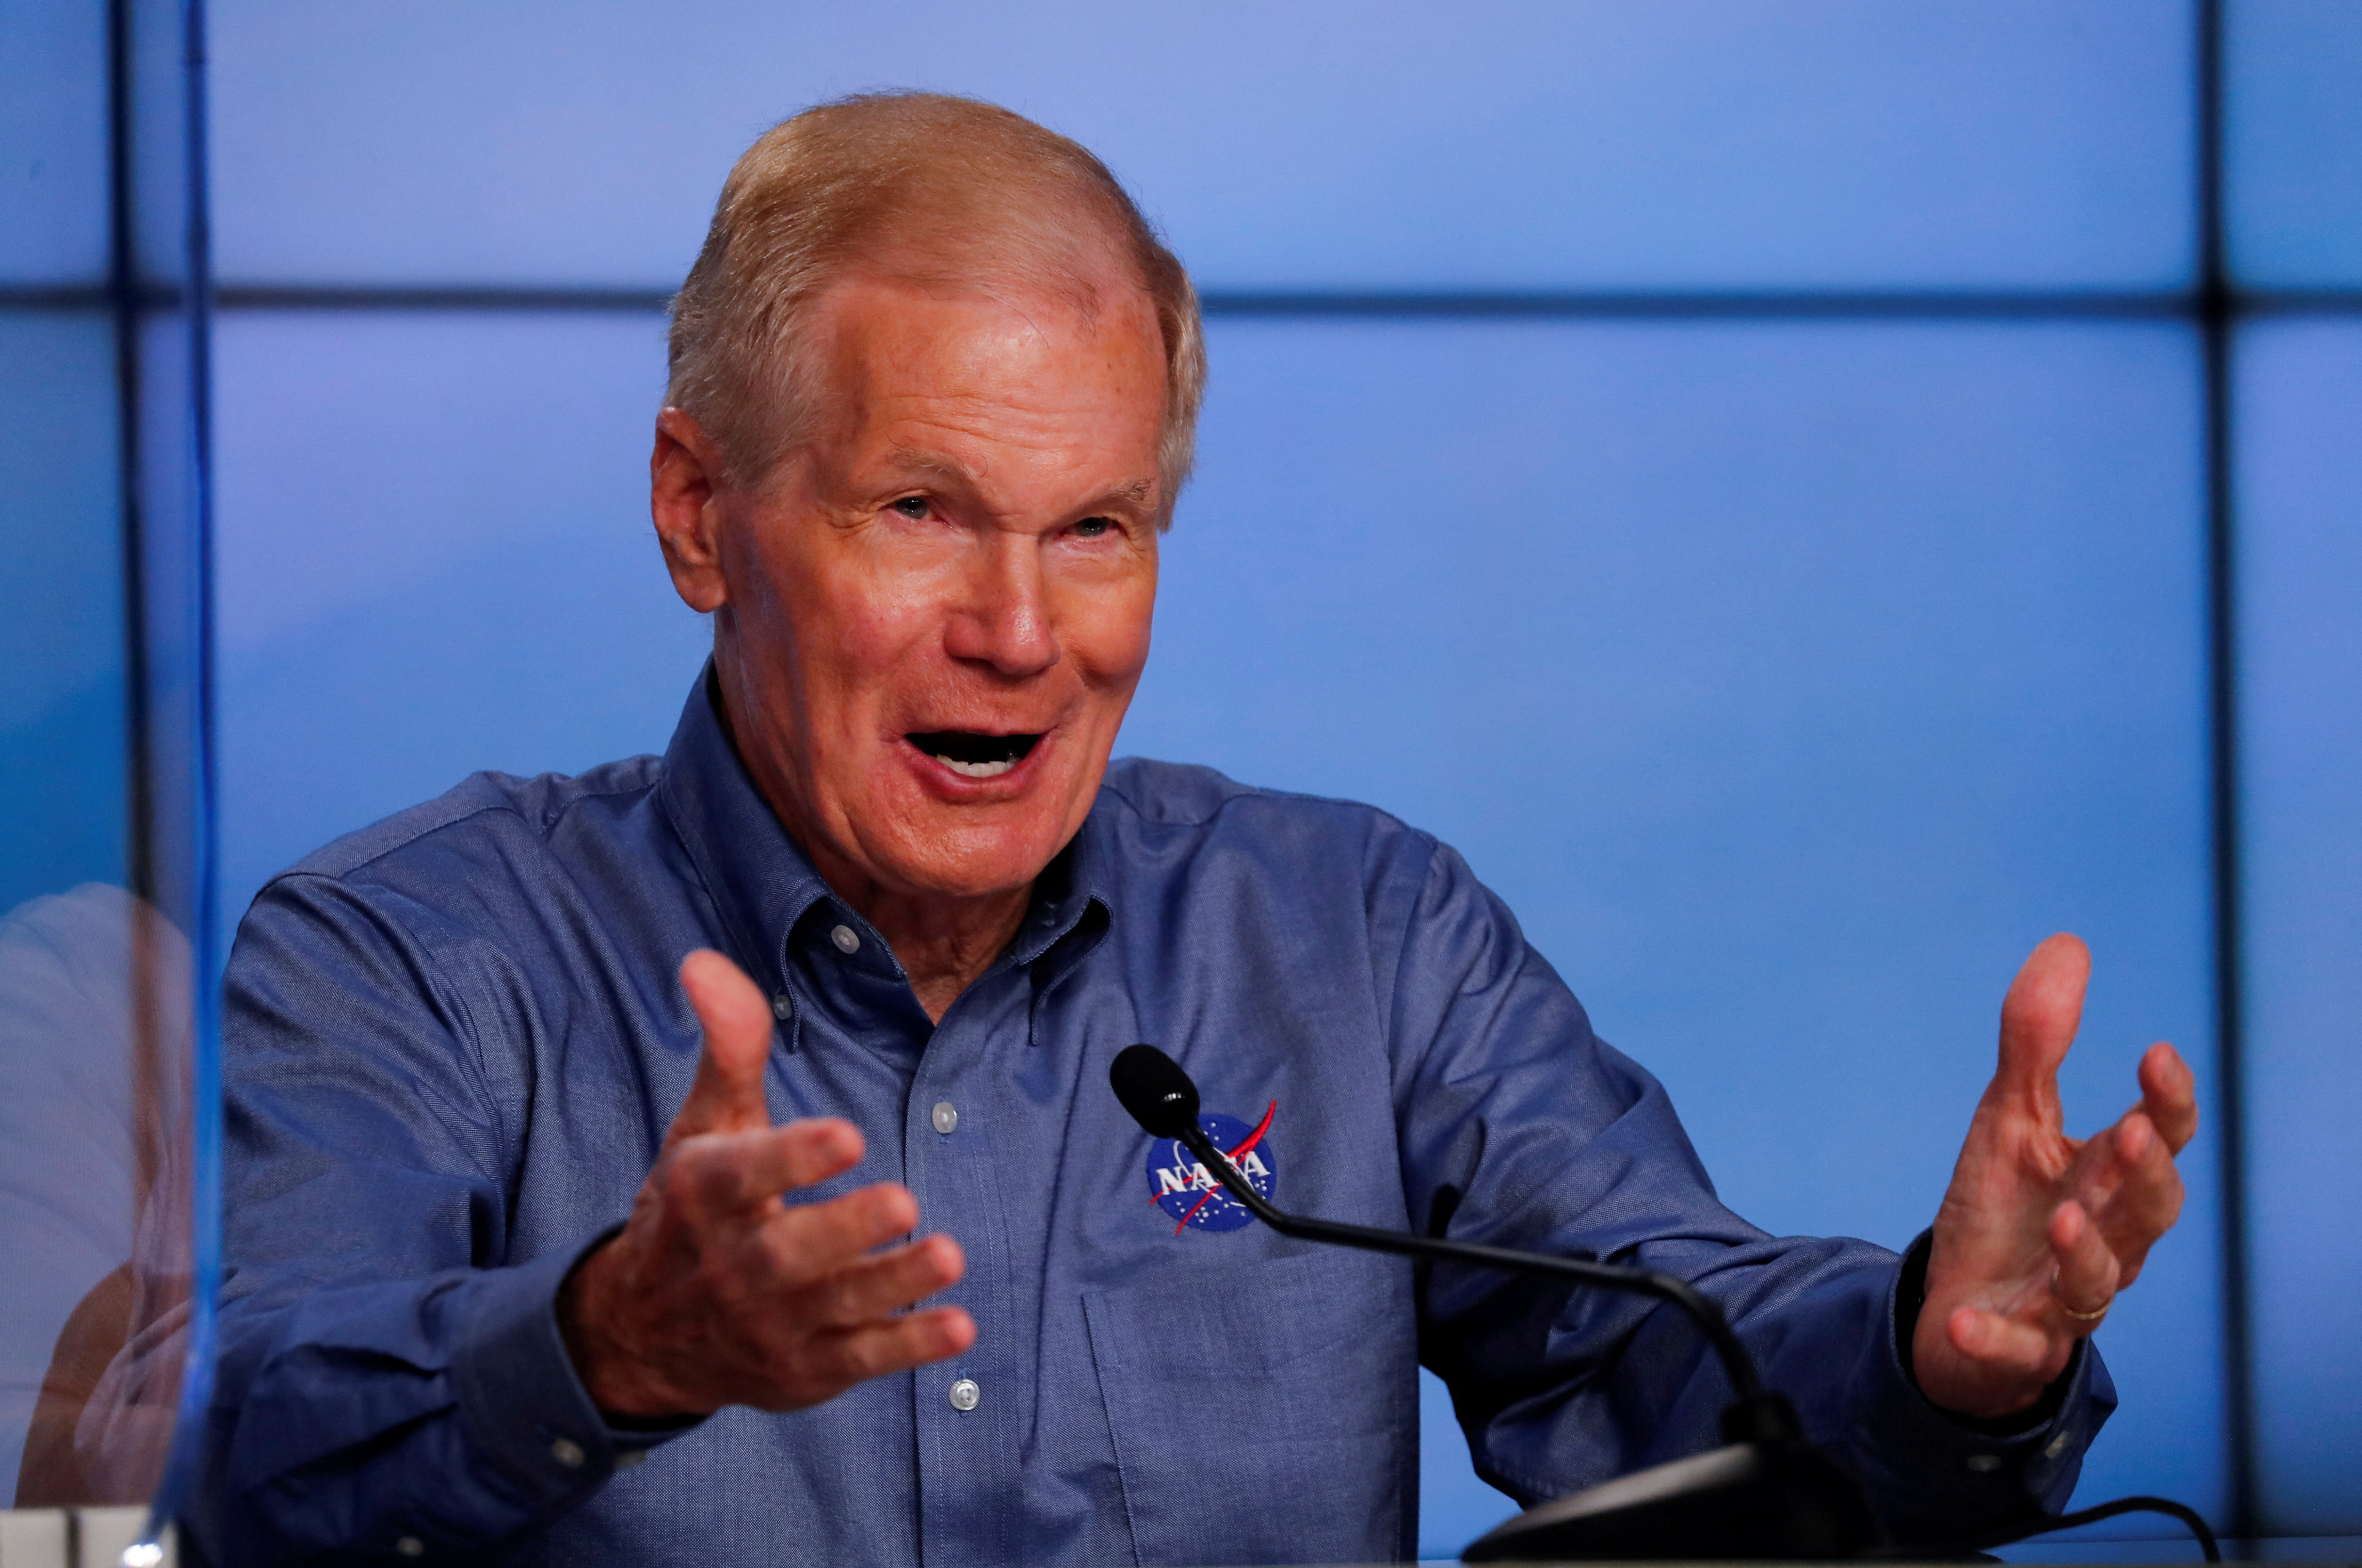 NASA Administrator Bill Nelson speaks prior to the launch of an Atlas V rocket carrying Boeing's CST-100 Starliner capsule in Cape Canaveral